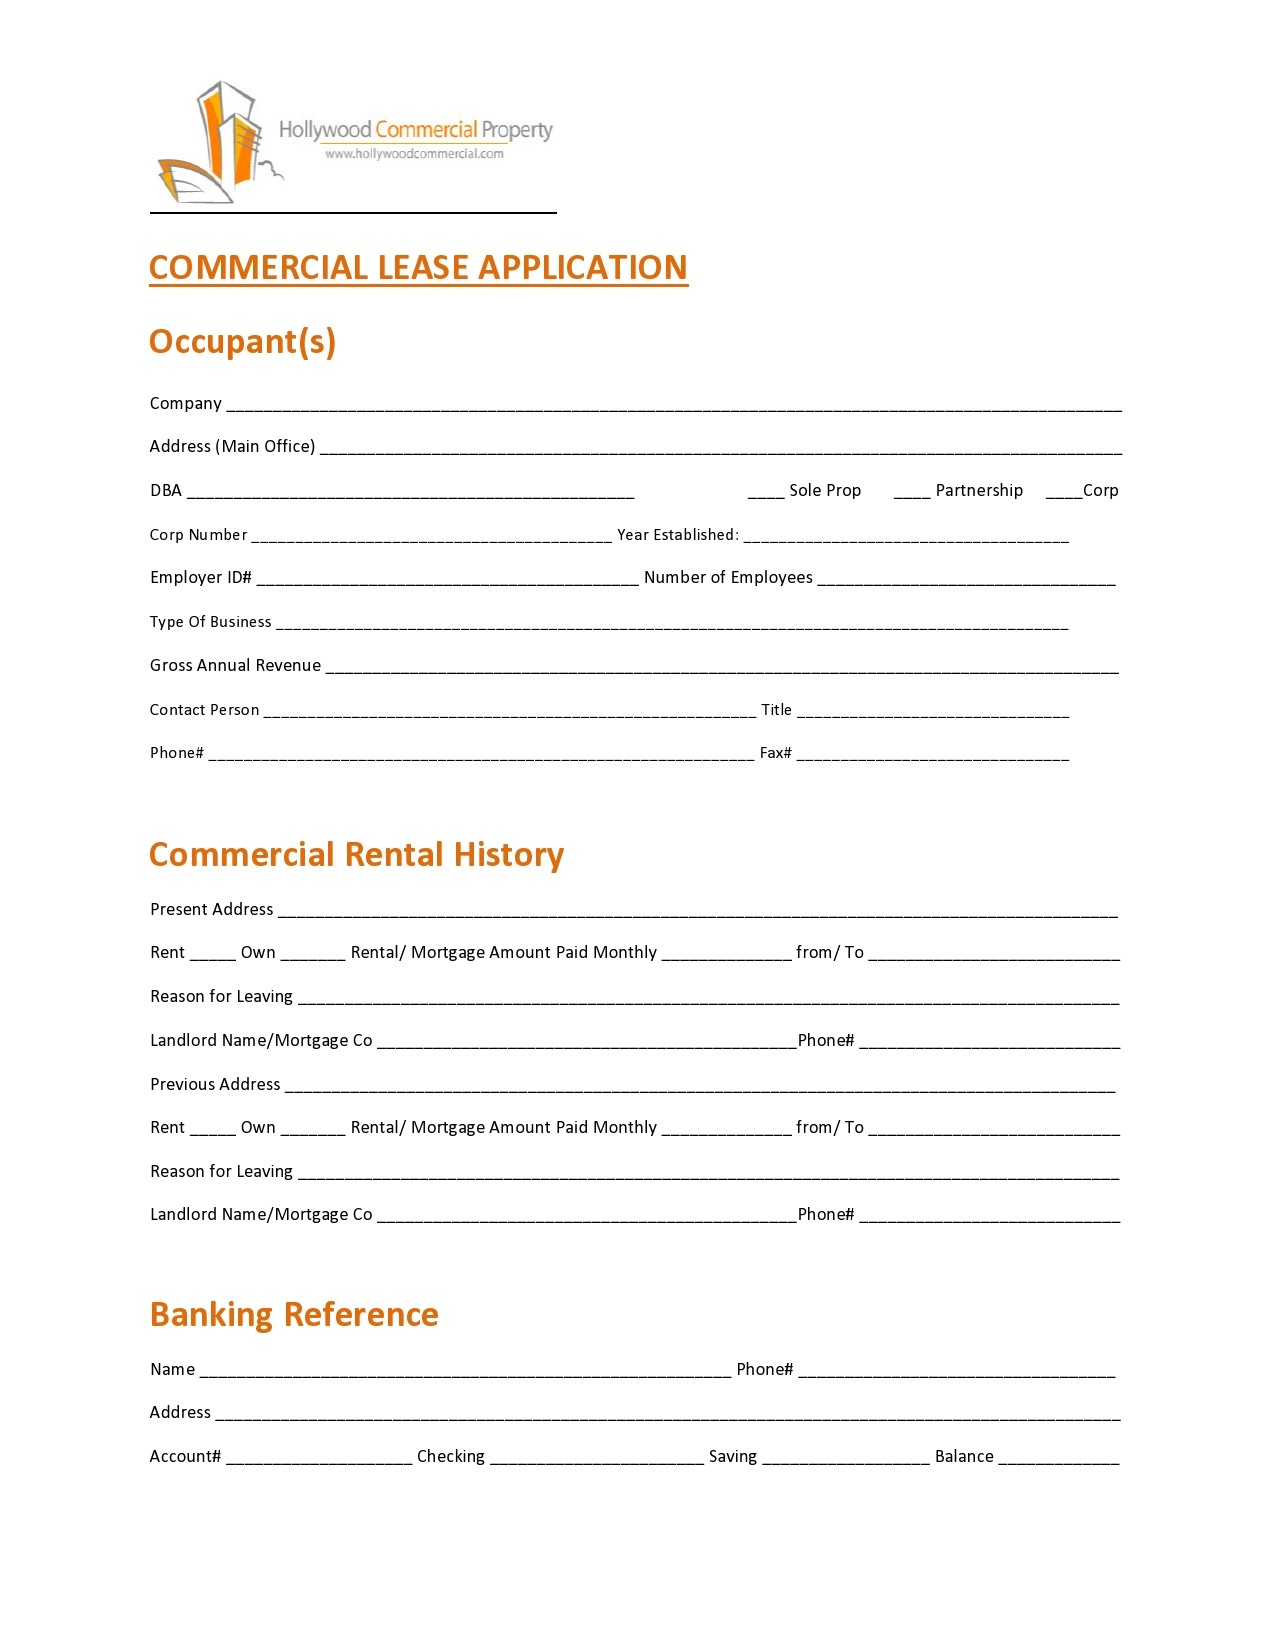 Free commercial lease application 16